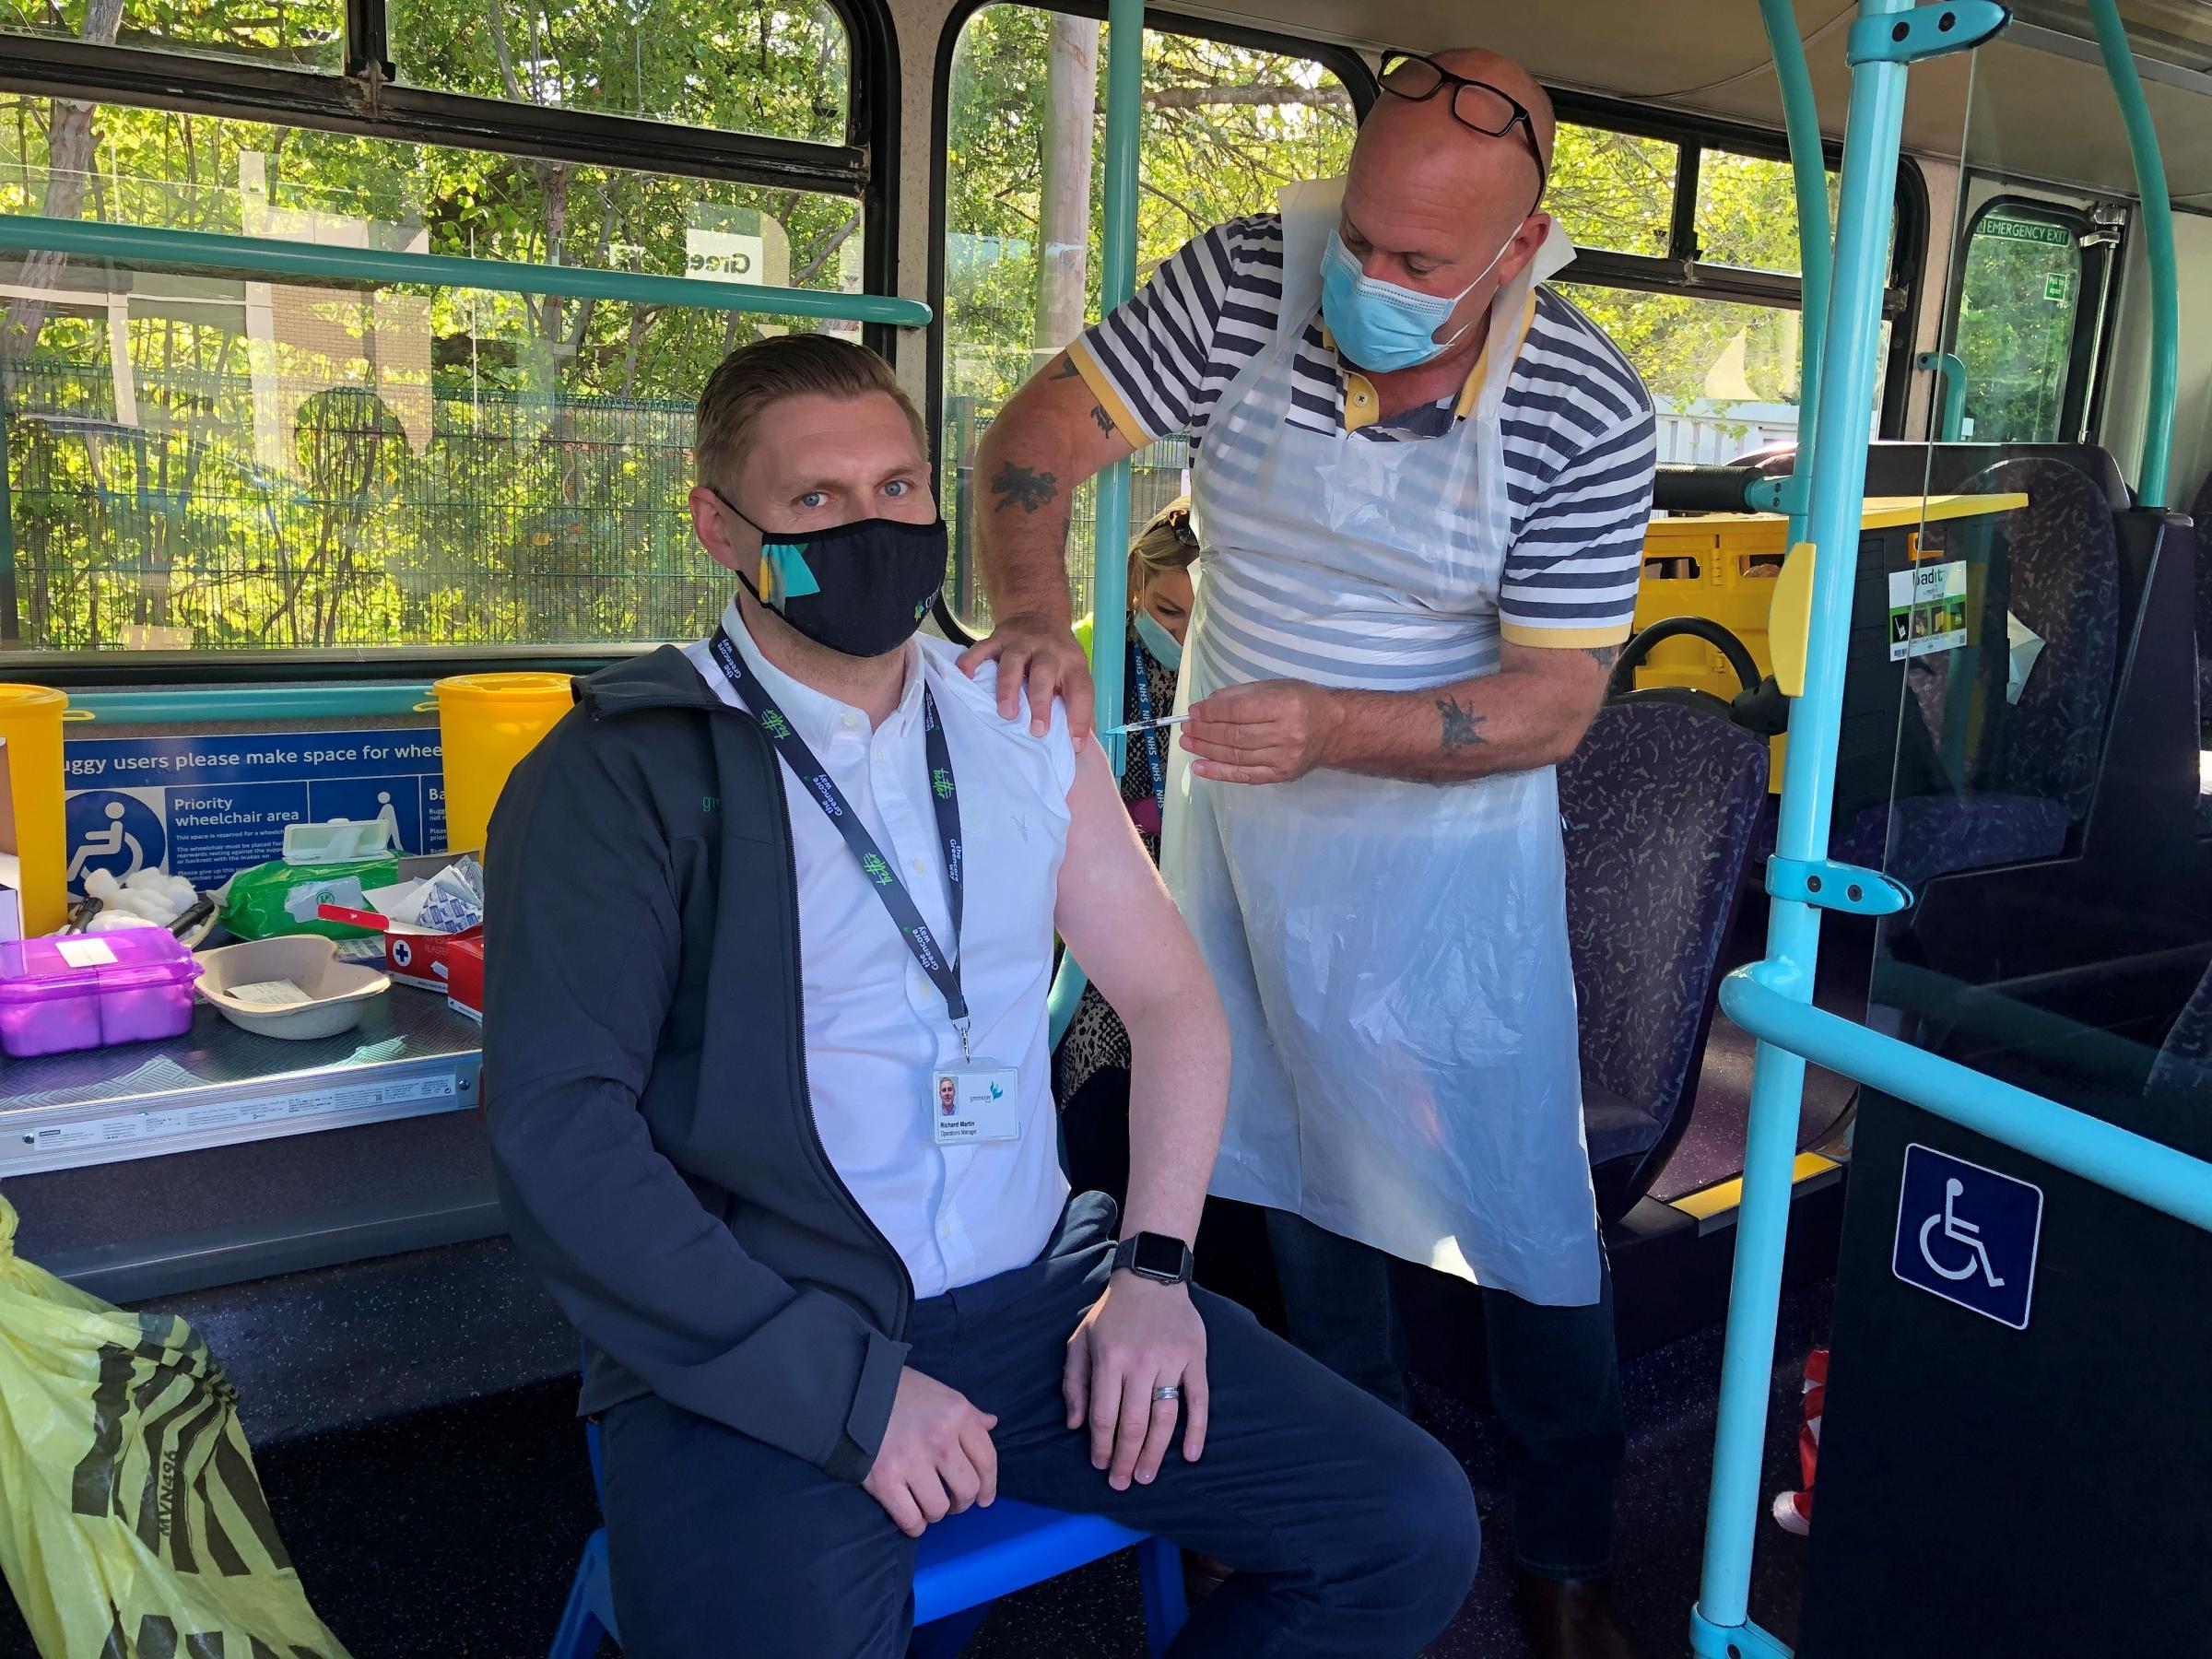 Operations manager Richard Martin receives his coronavirus vaccine aboard the bus